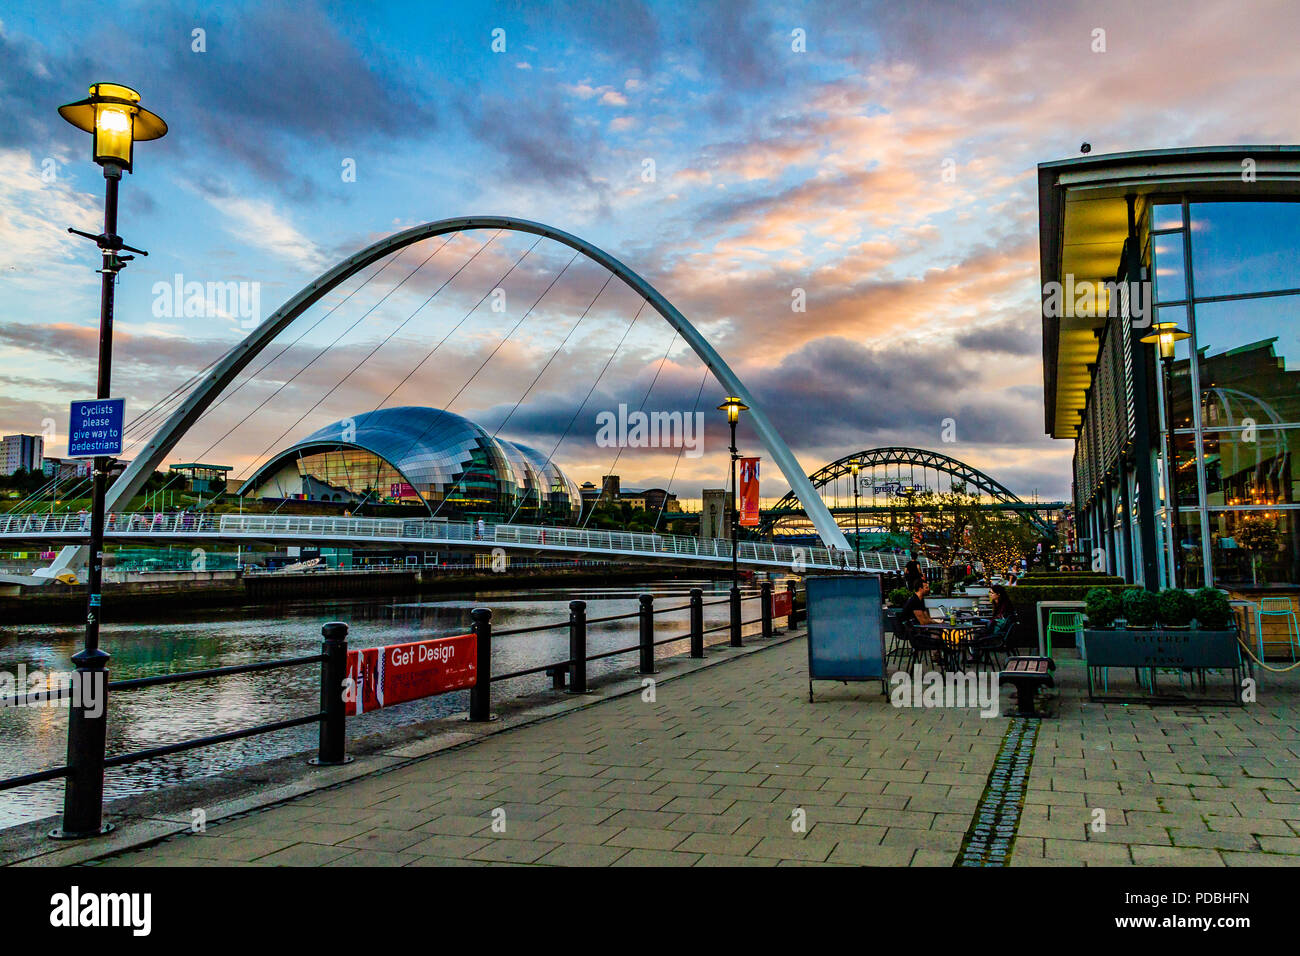 View of the Tyne River from outside Pitcher & Piano bar, looking towards the Millennium Bridge, Tyne Bridge and the Sage at sunset. Newcastle, UK. Stock Photo